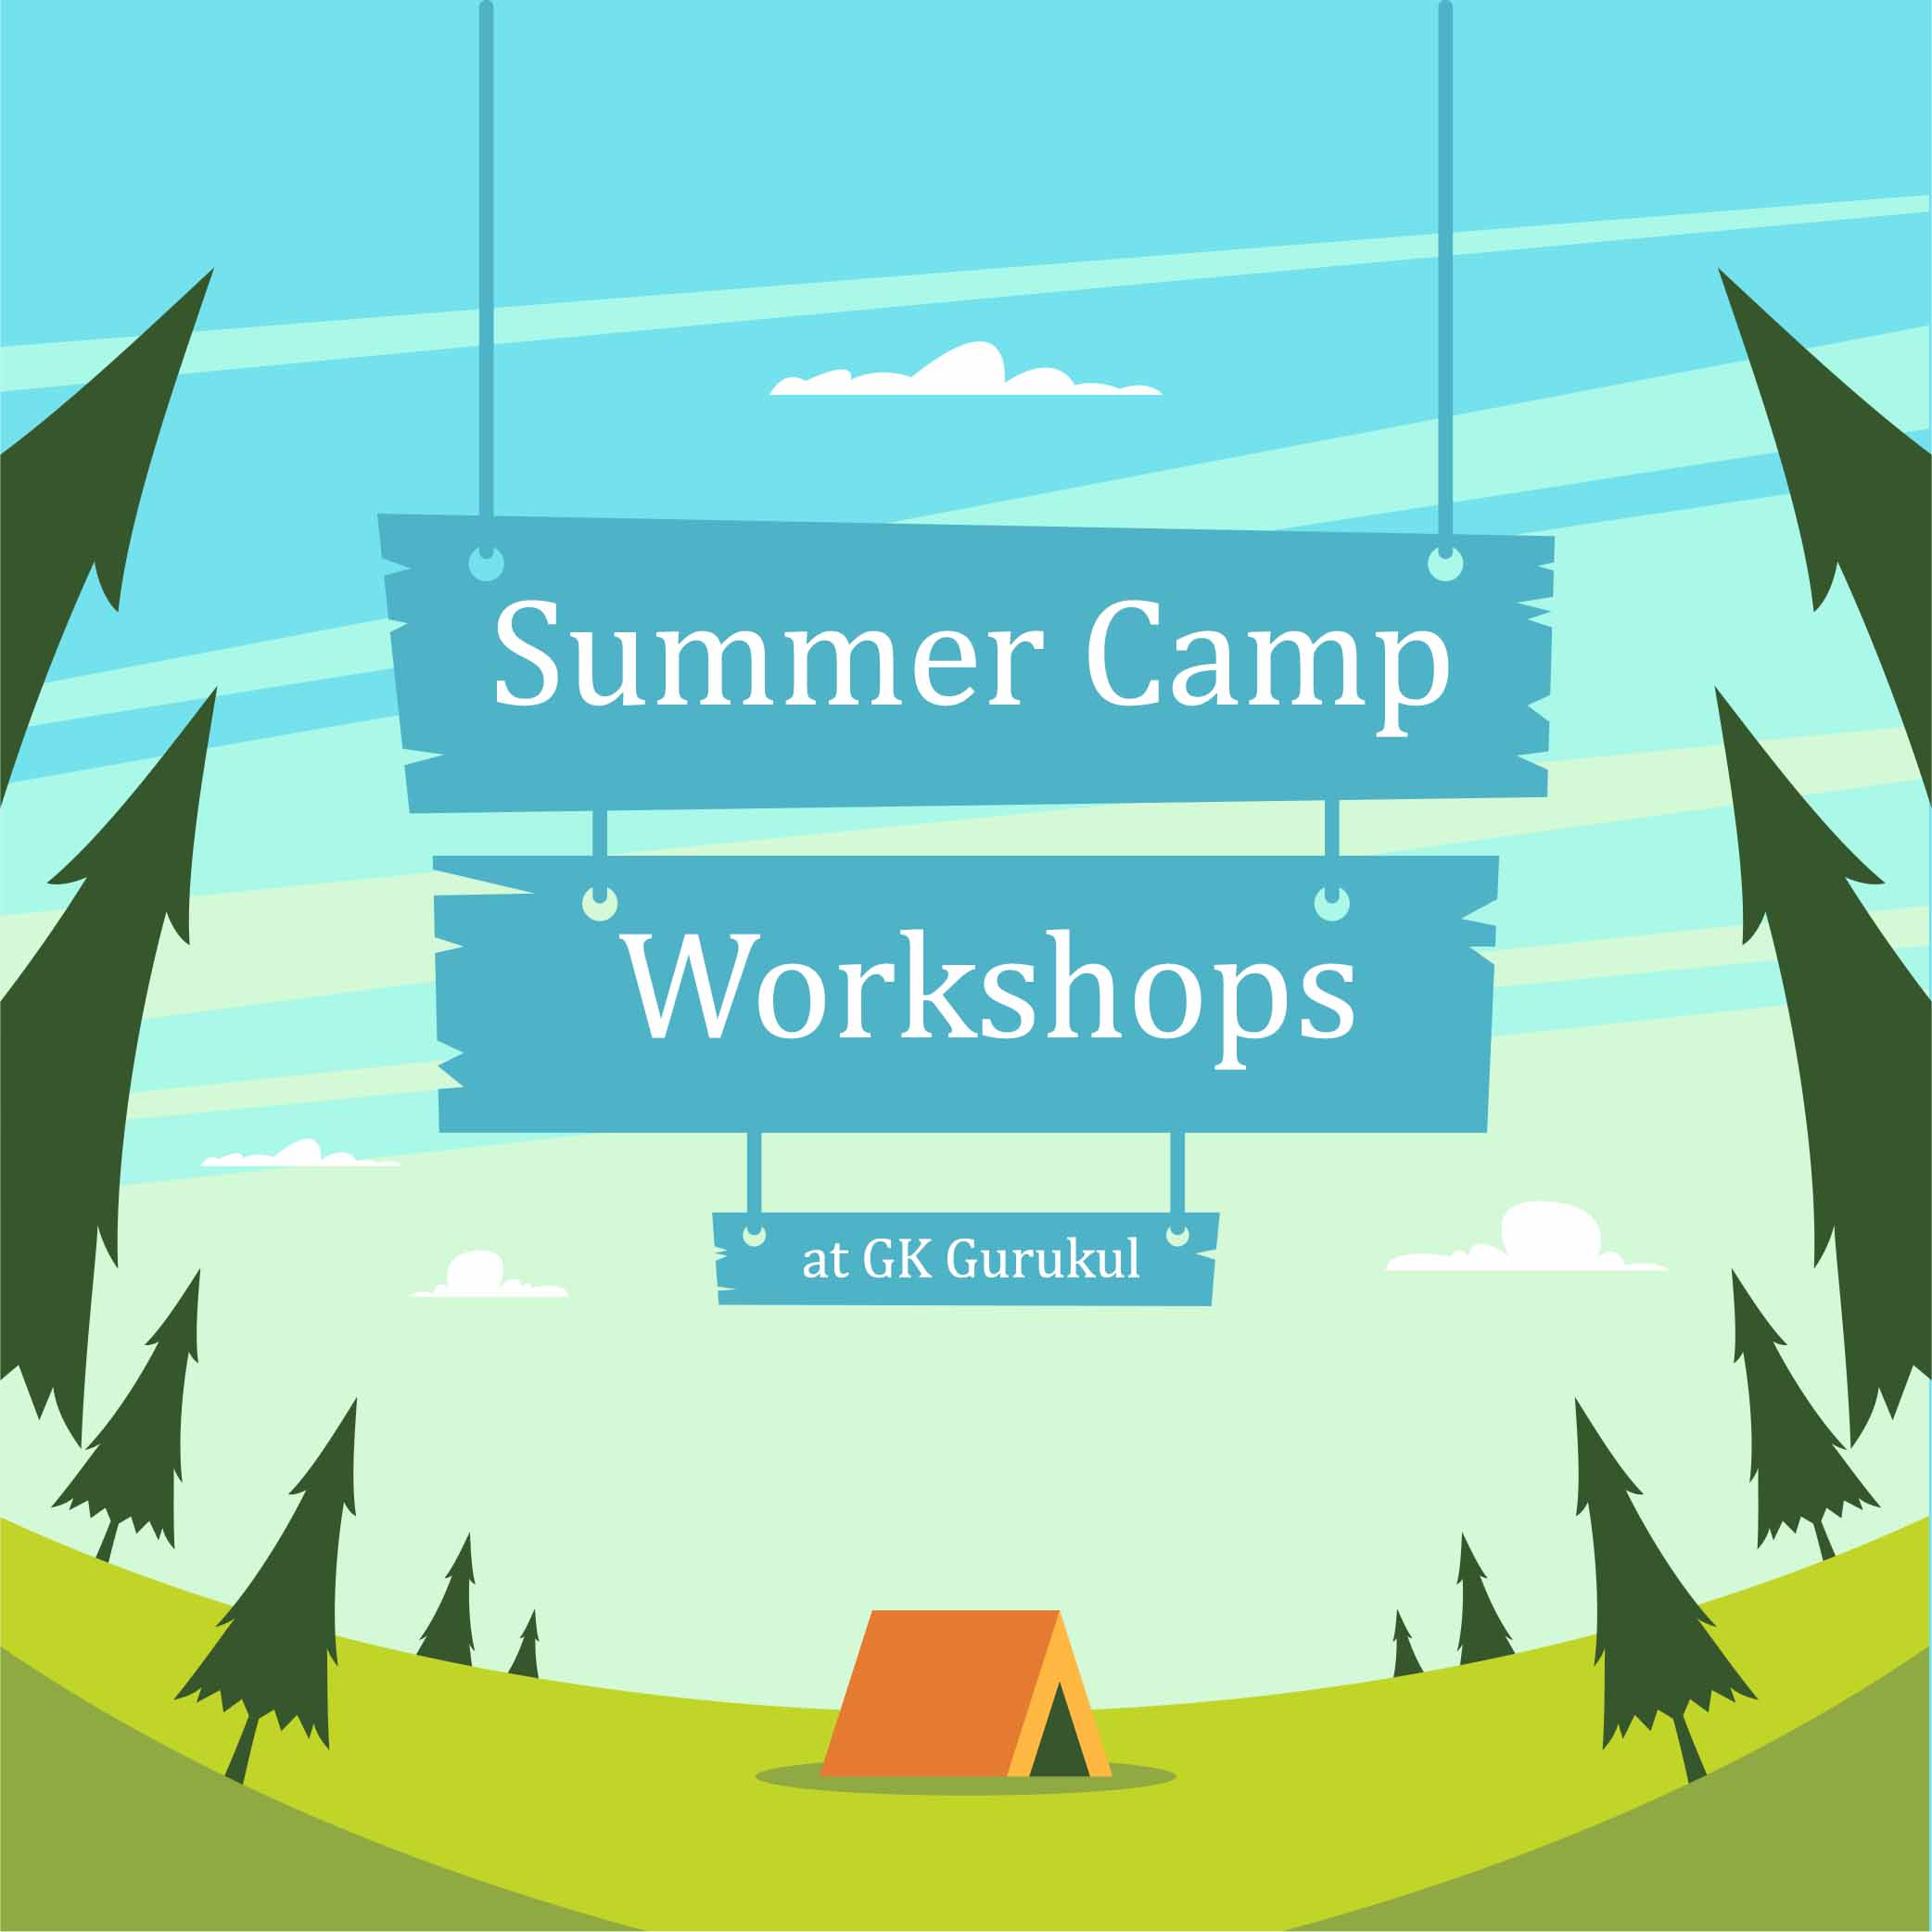 Summer Camps in Pune